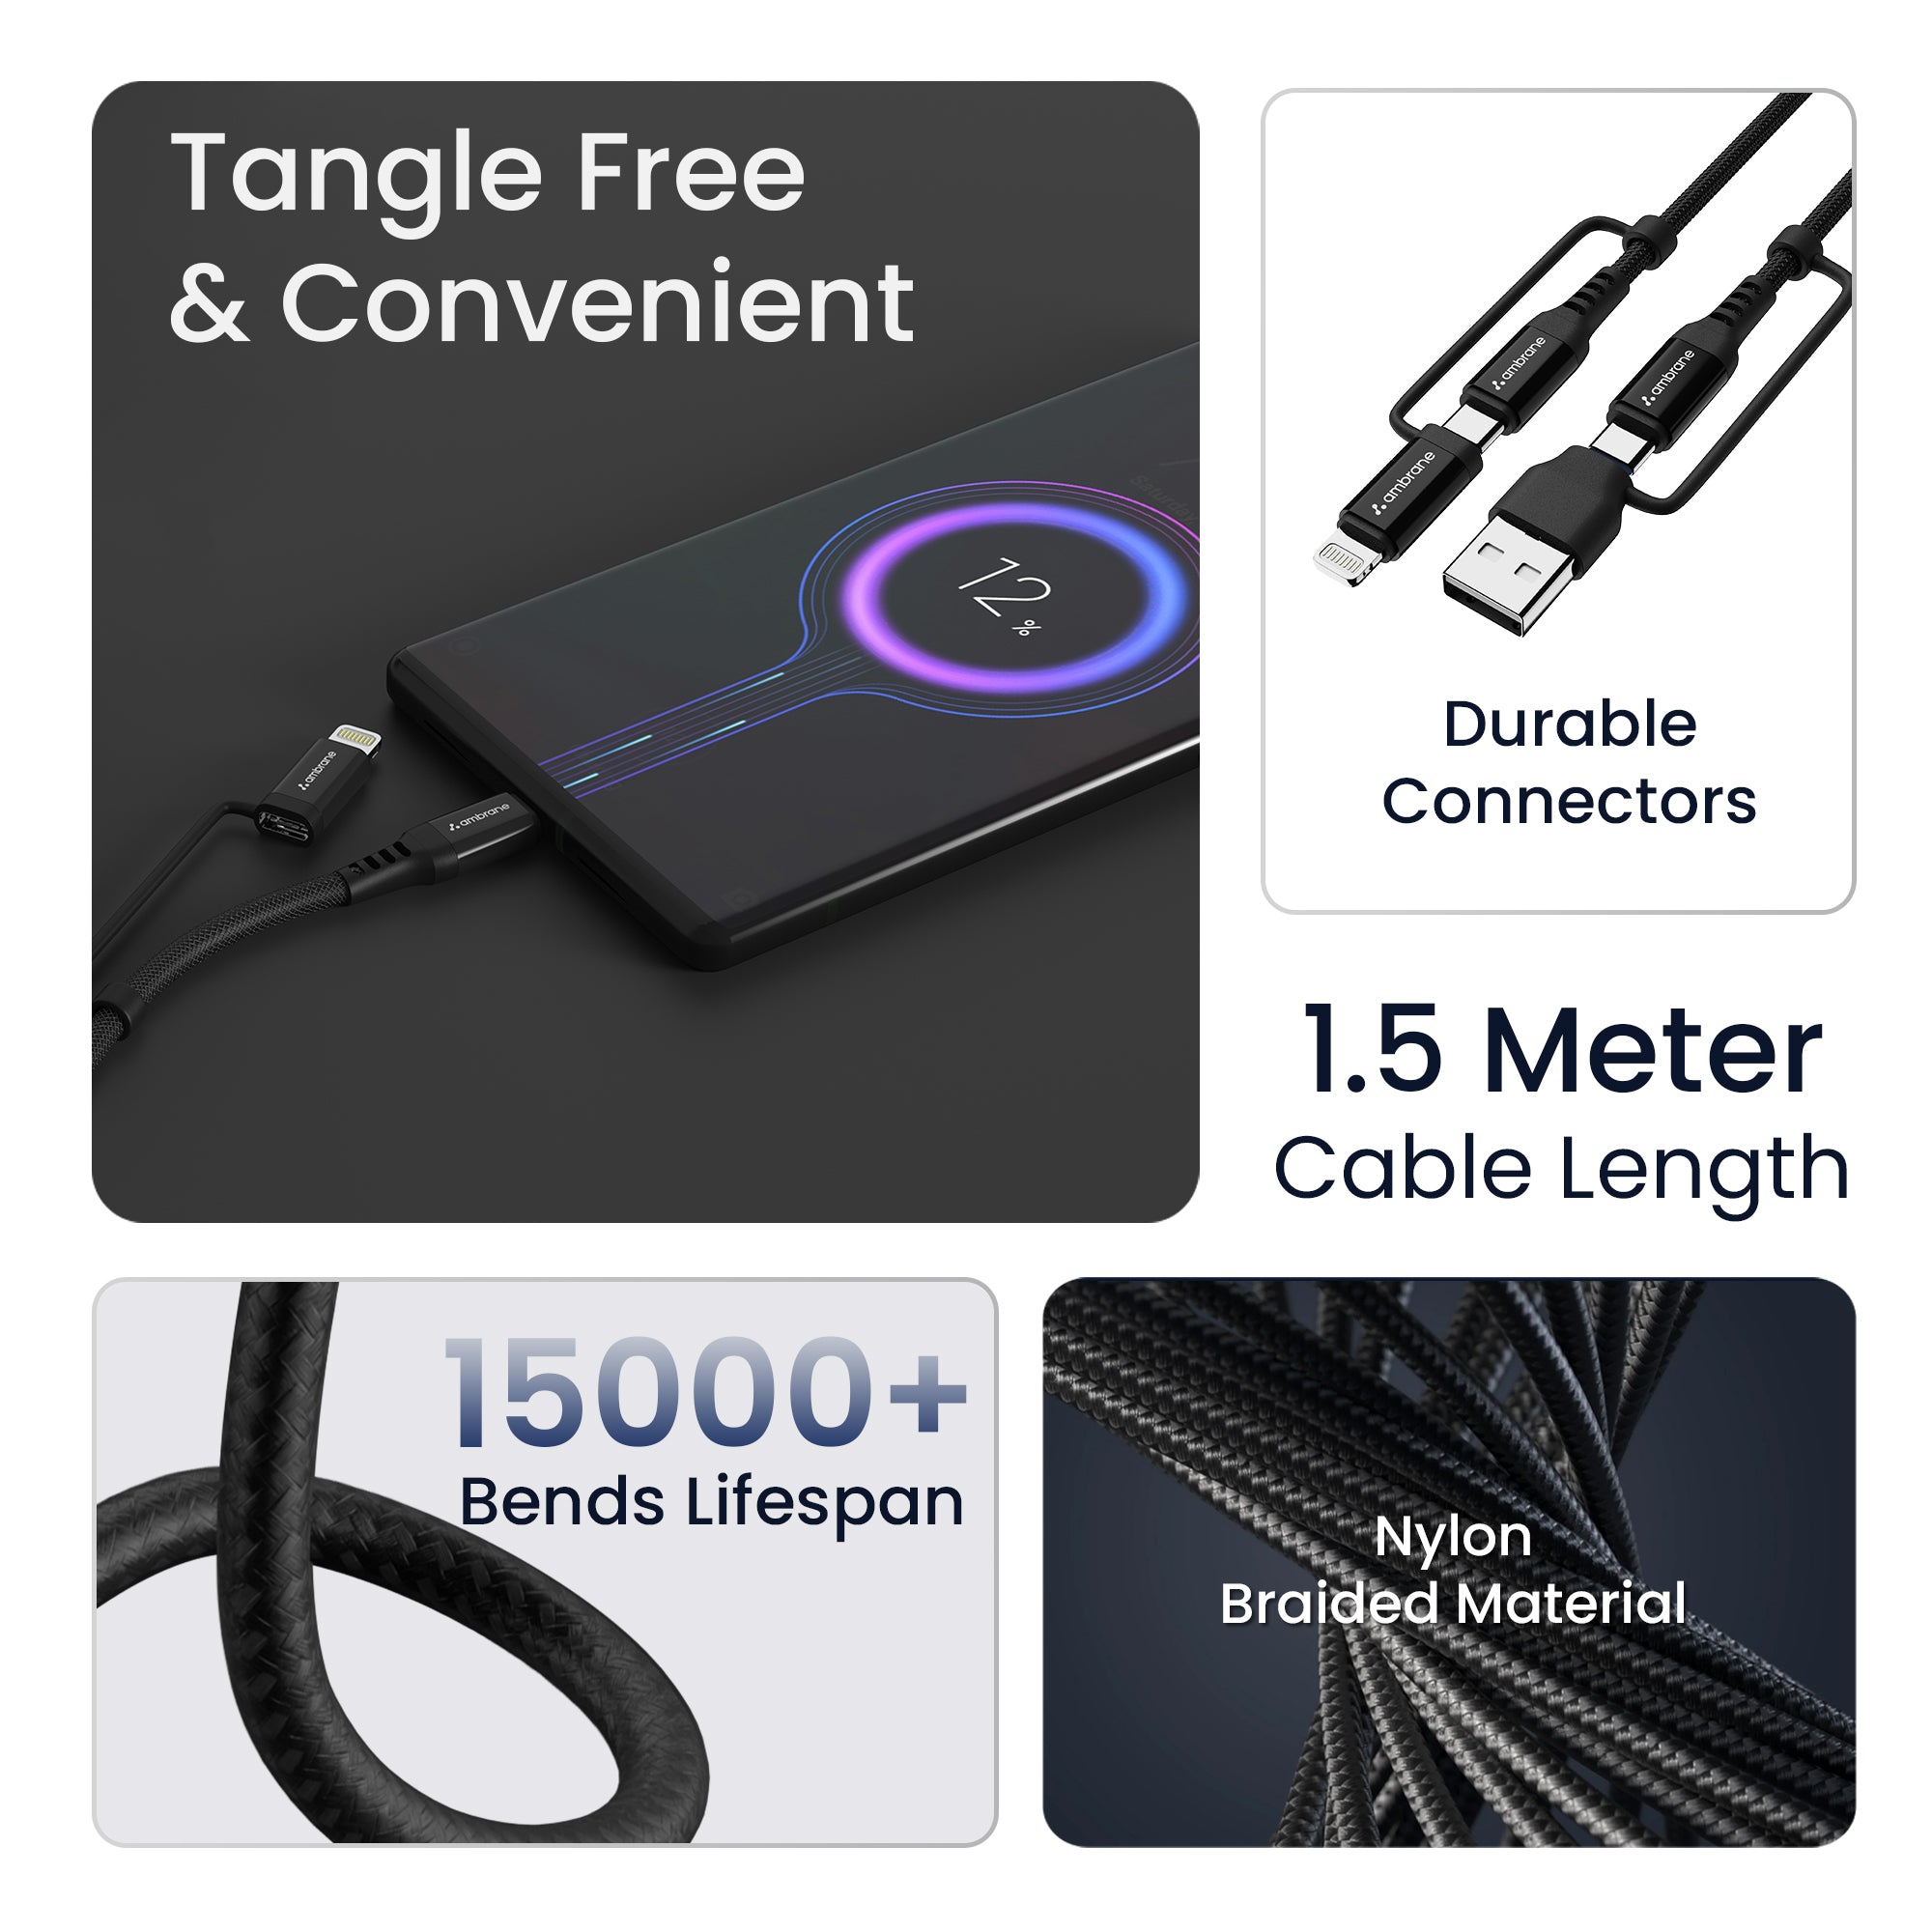 4 in 1 Cable